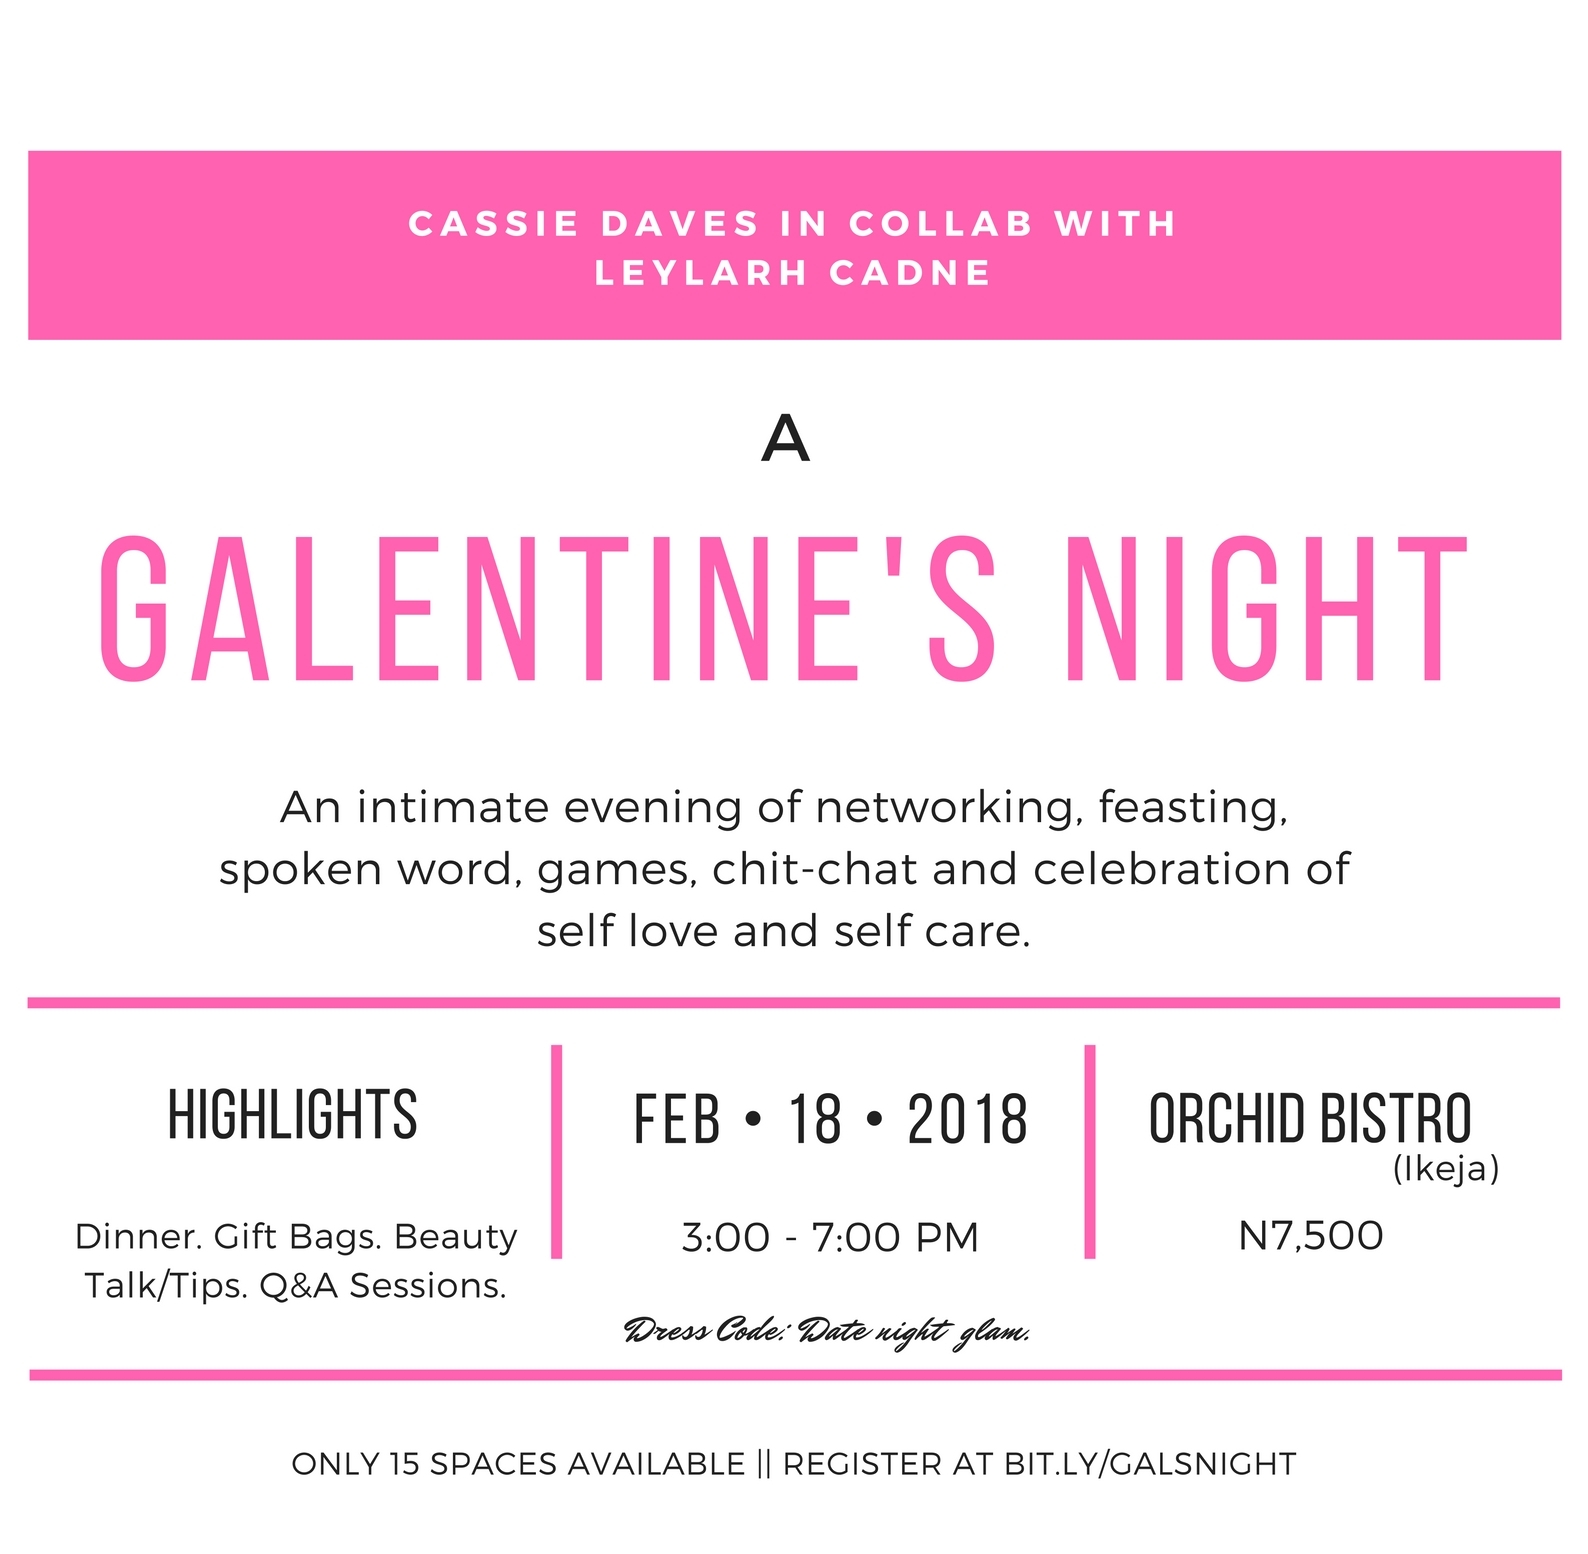 Galentine’s day with cassiedaves and Leylarh Cadne flyer image